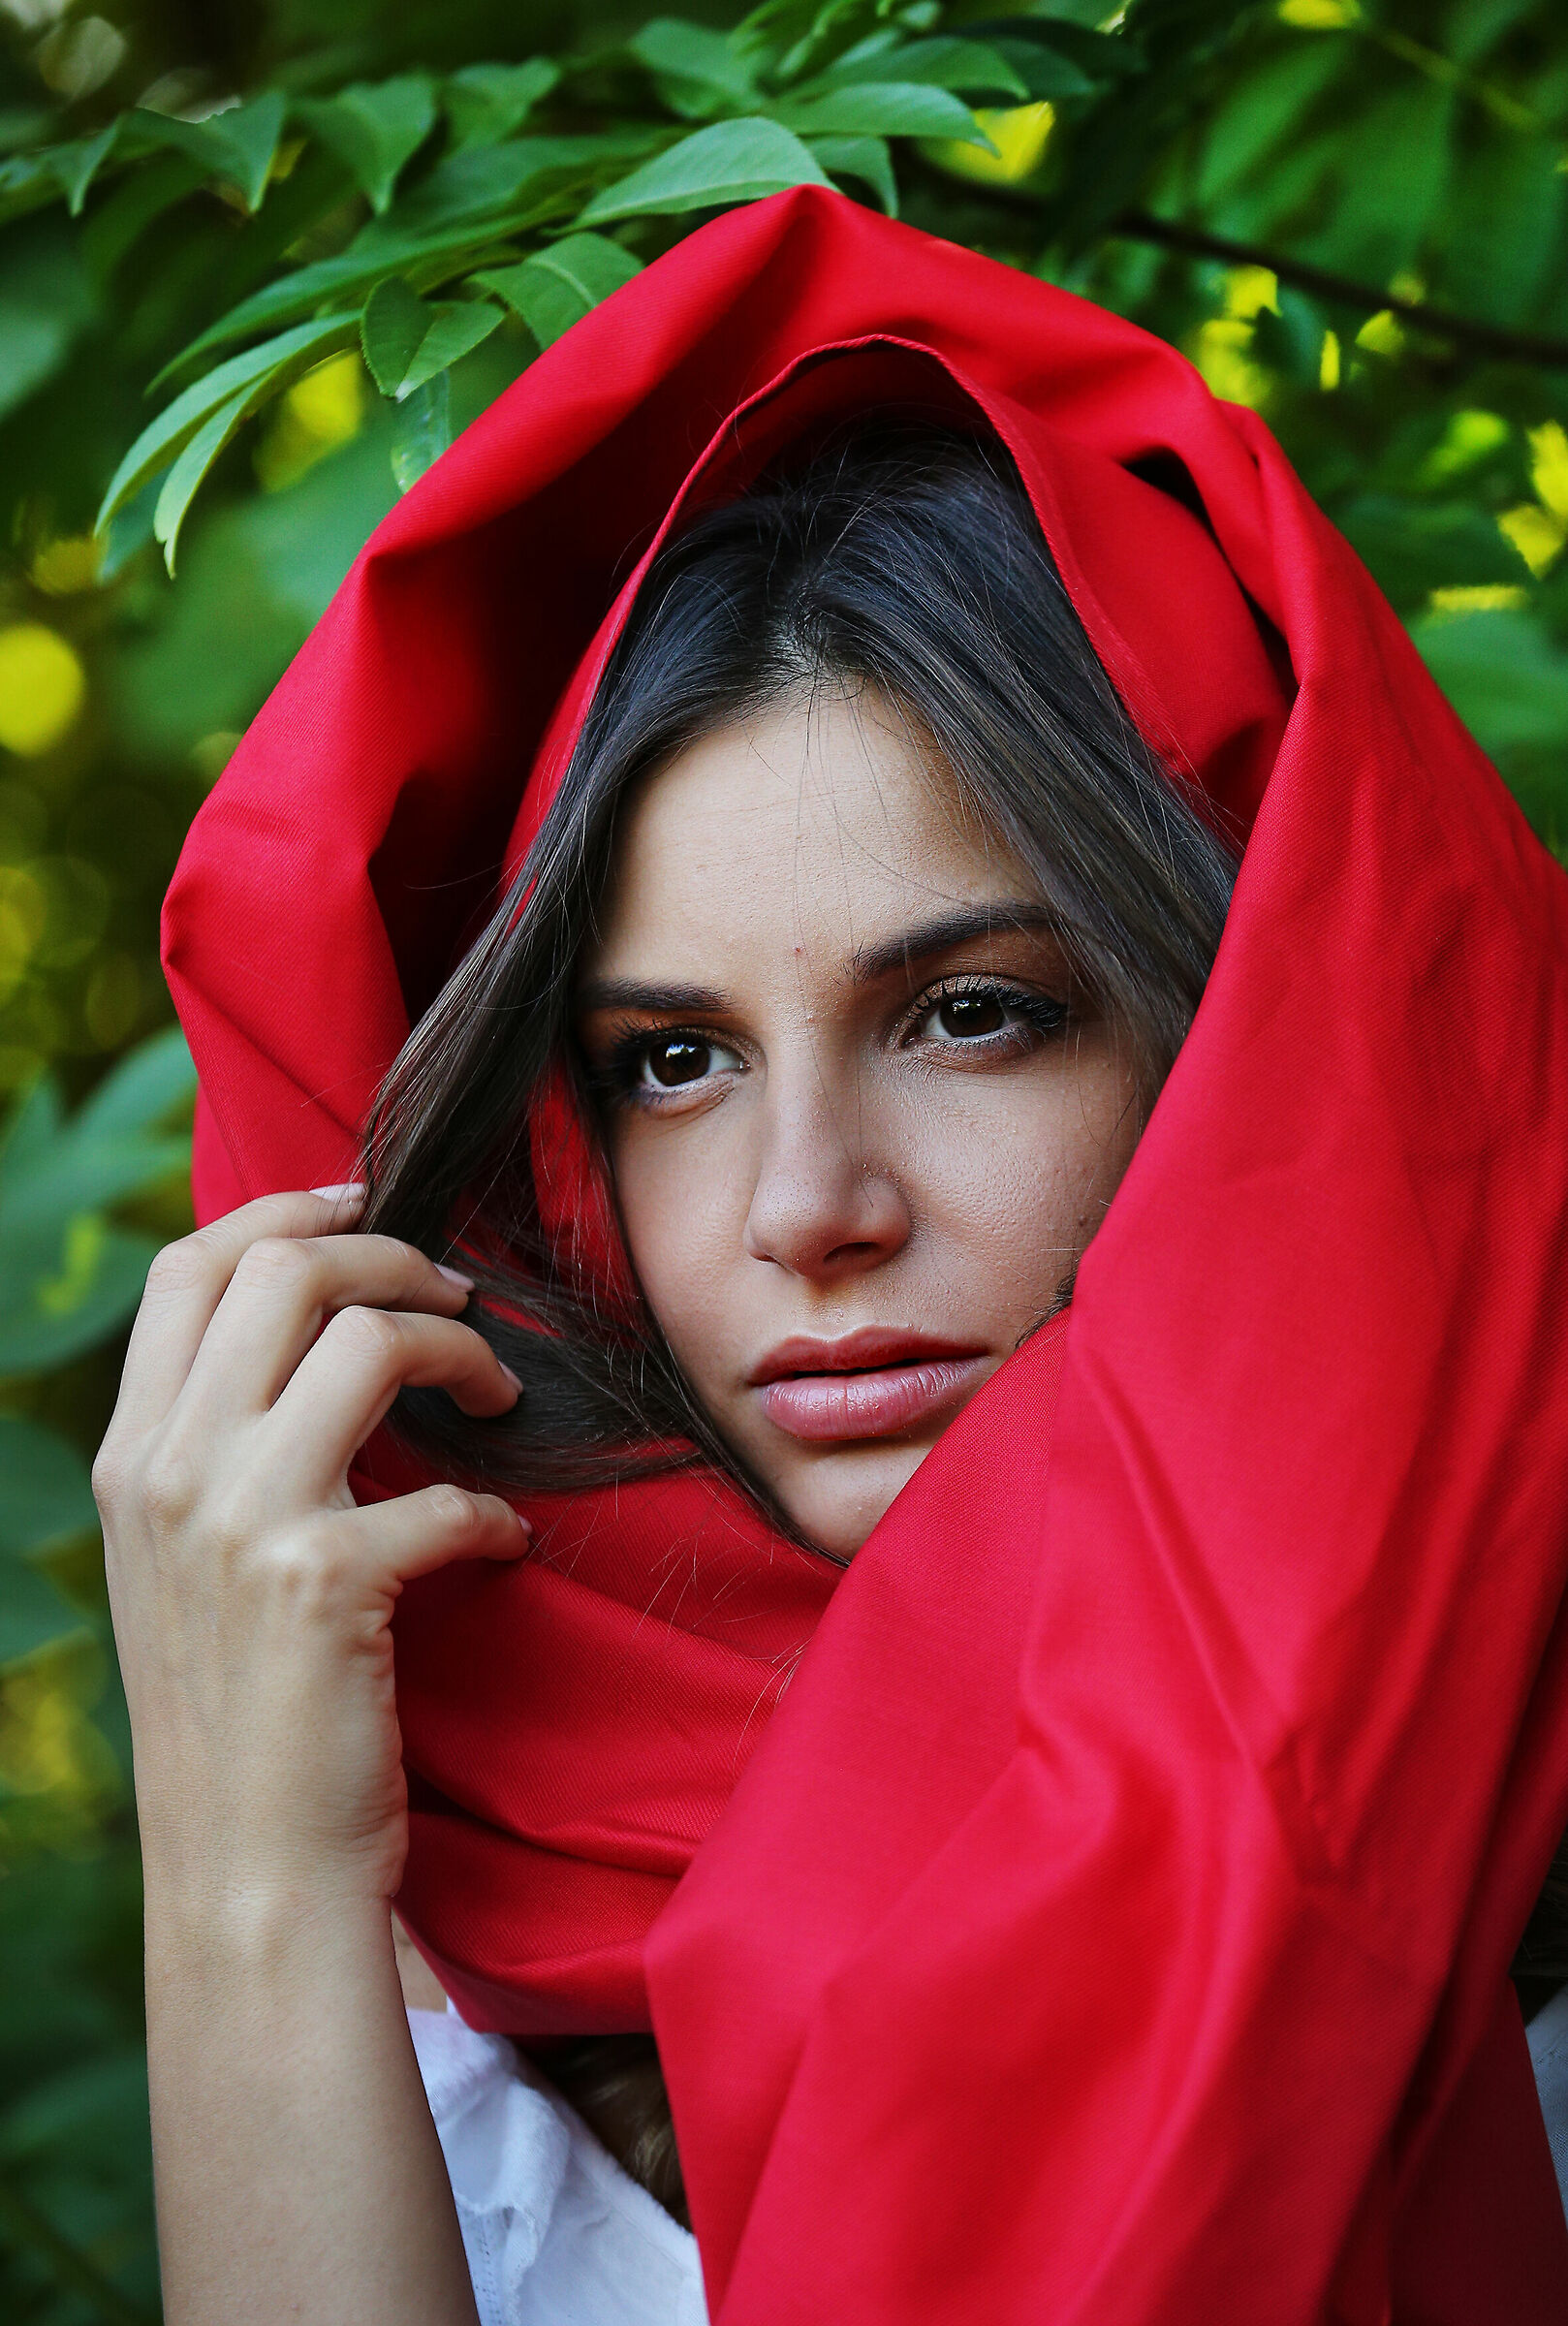 Little Red Riding Hood...